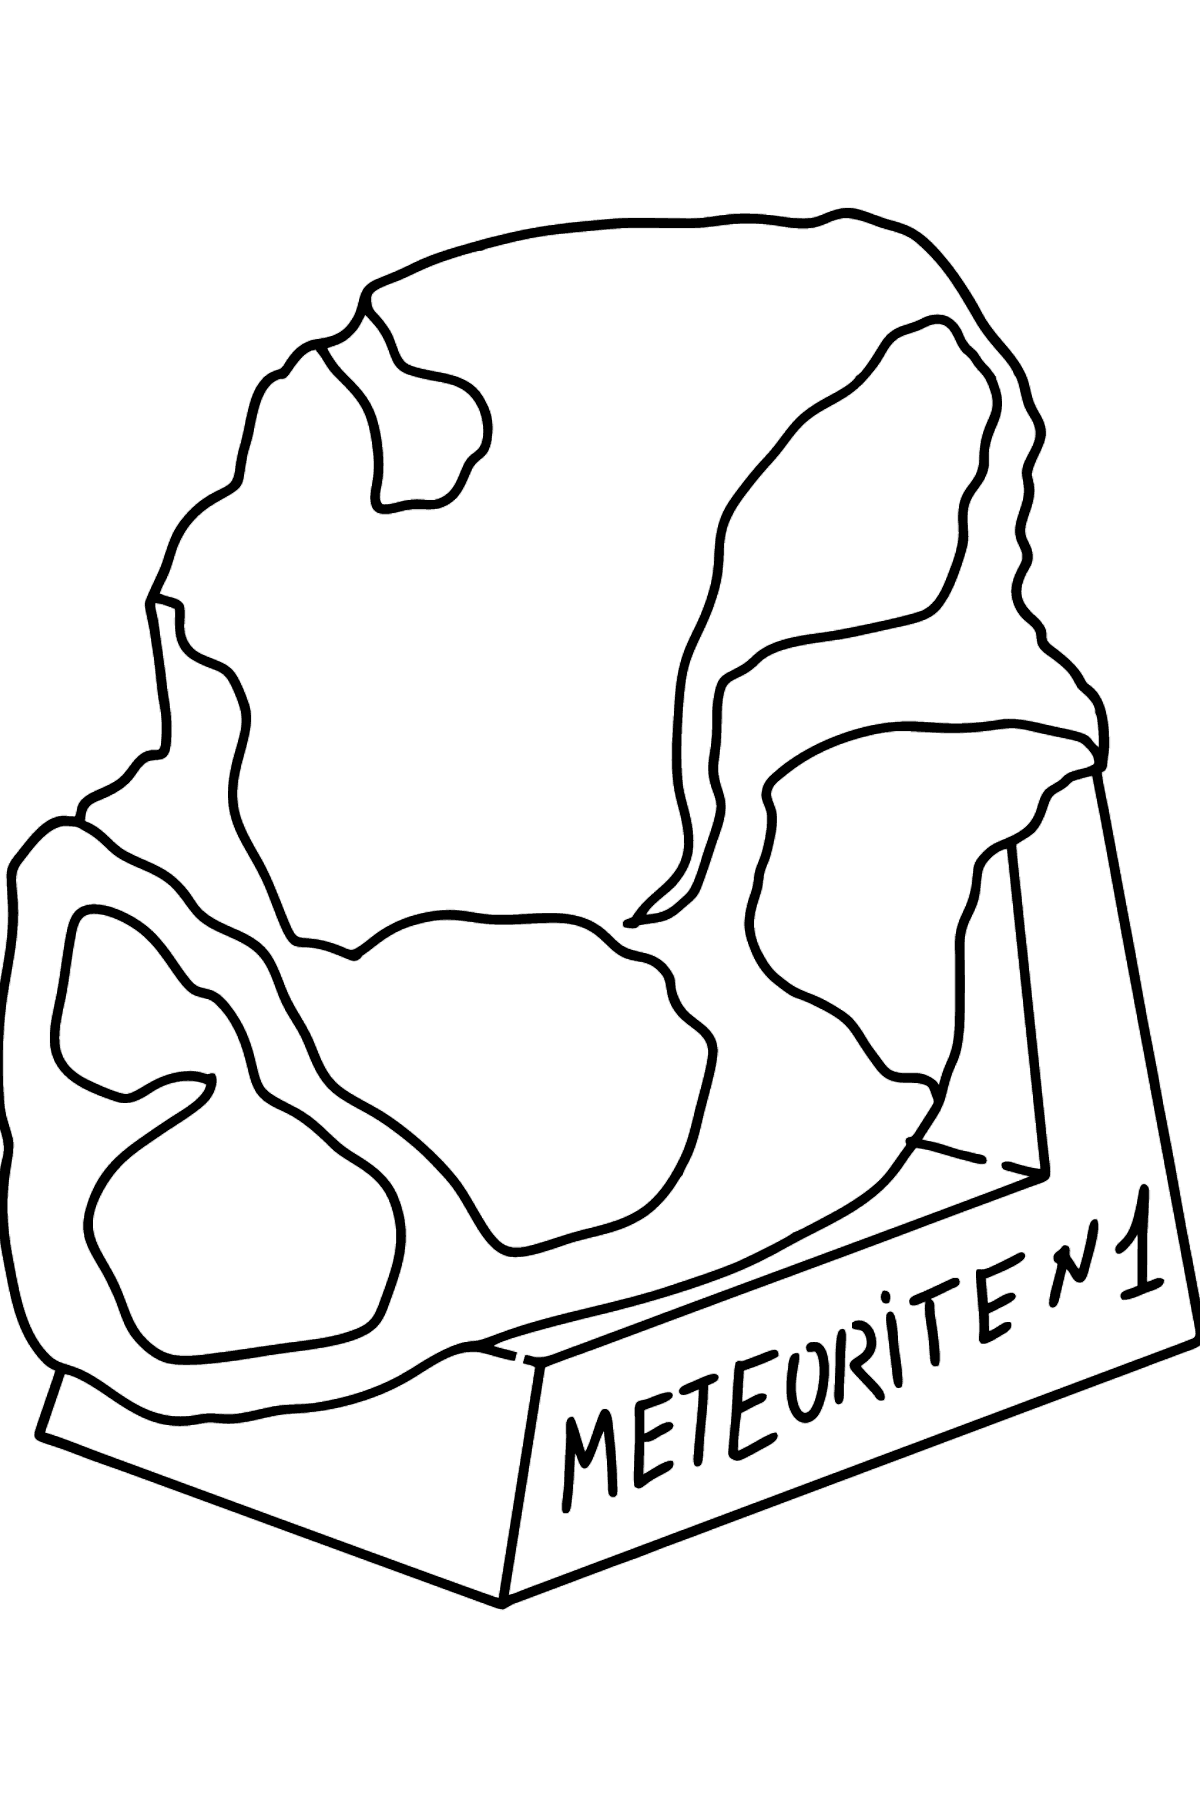 Meteorite coloring page - Coloring Pages for Kids